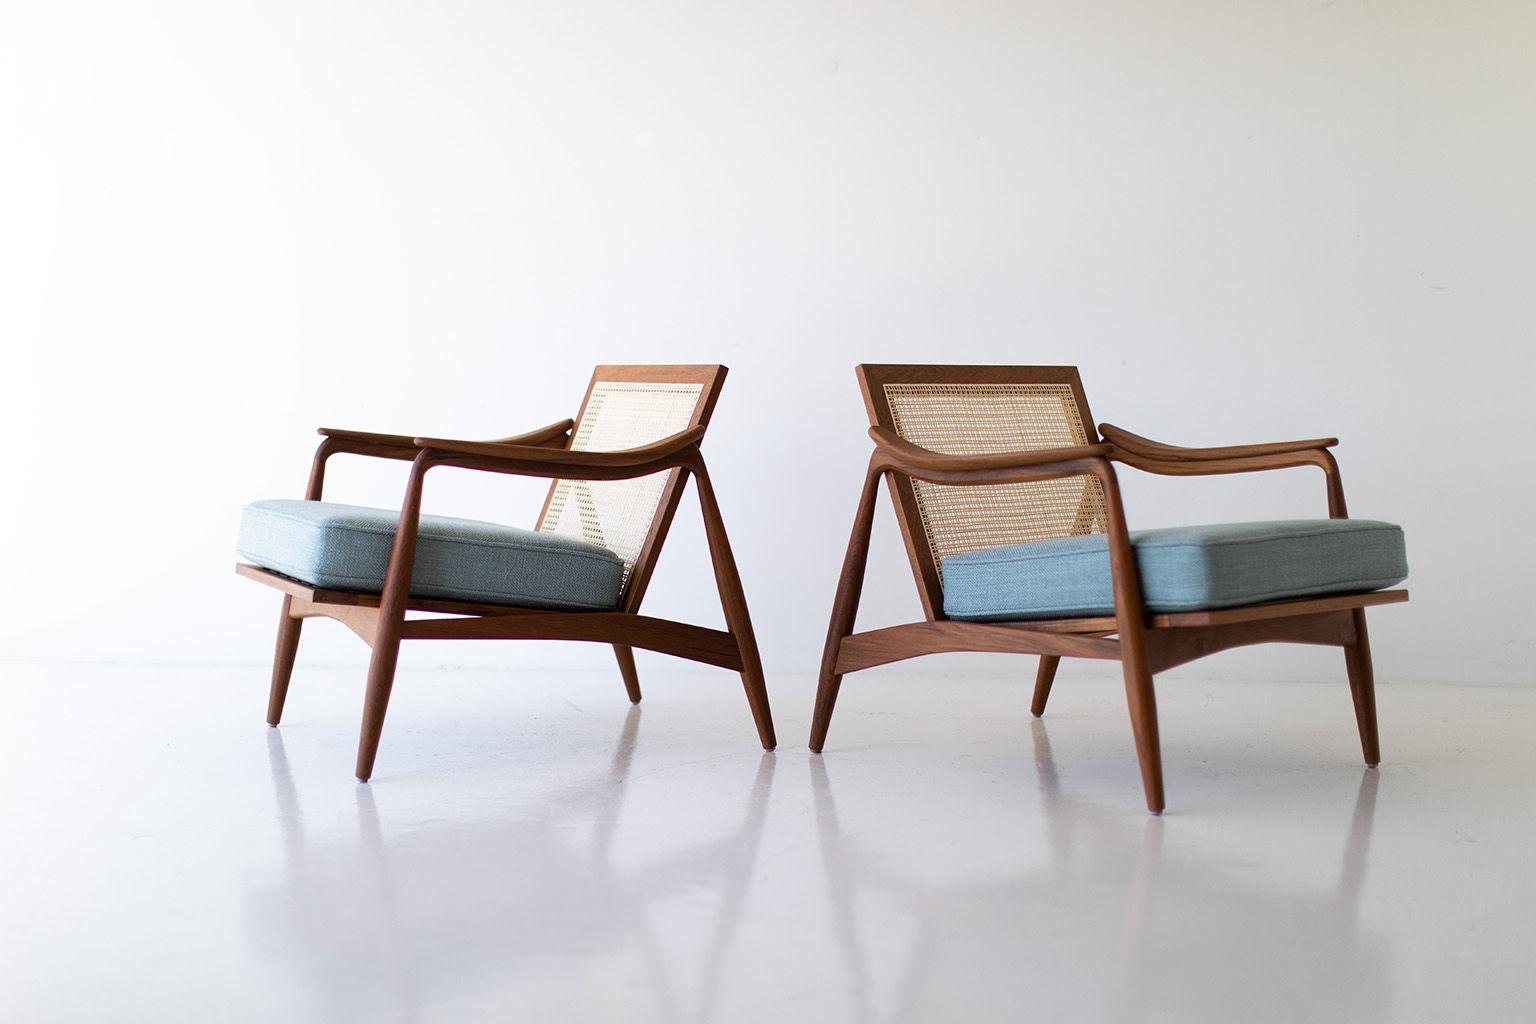 Lawrence Peabody cane back teak lounge chairs - 2001P

These Lawrence Peabody cane back teak lounge chairs- 2001P for Craft Associates Furniture are expertly handcrafted, caned, and upholstered by artisans in America. These Peabody chairs are